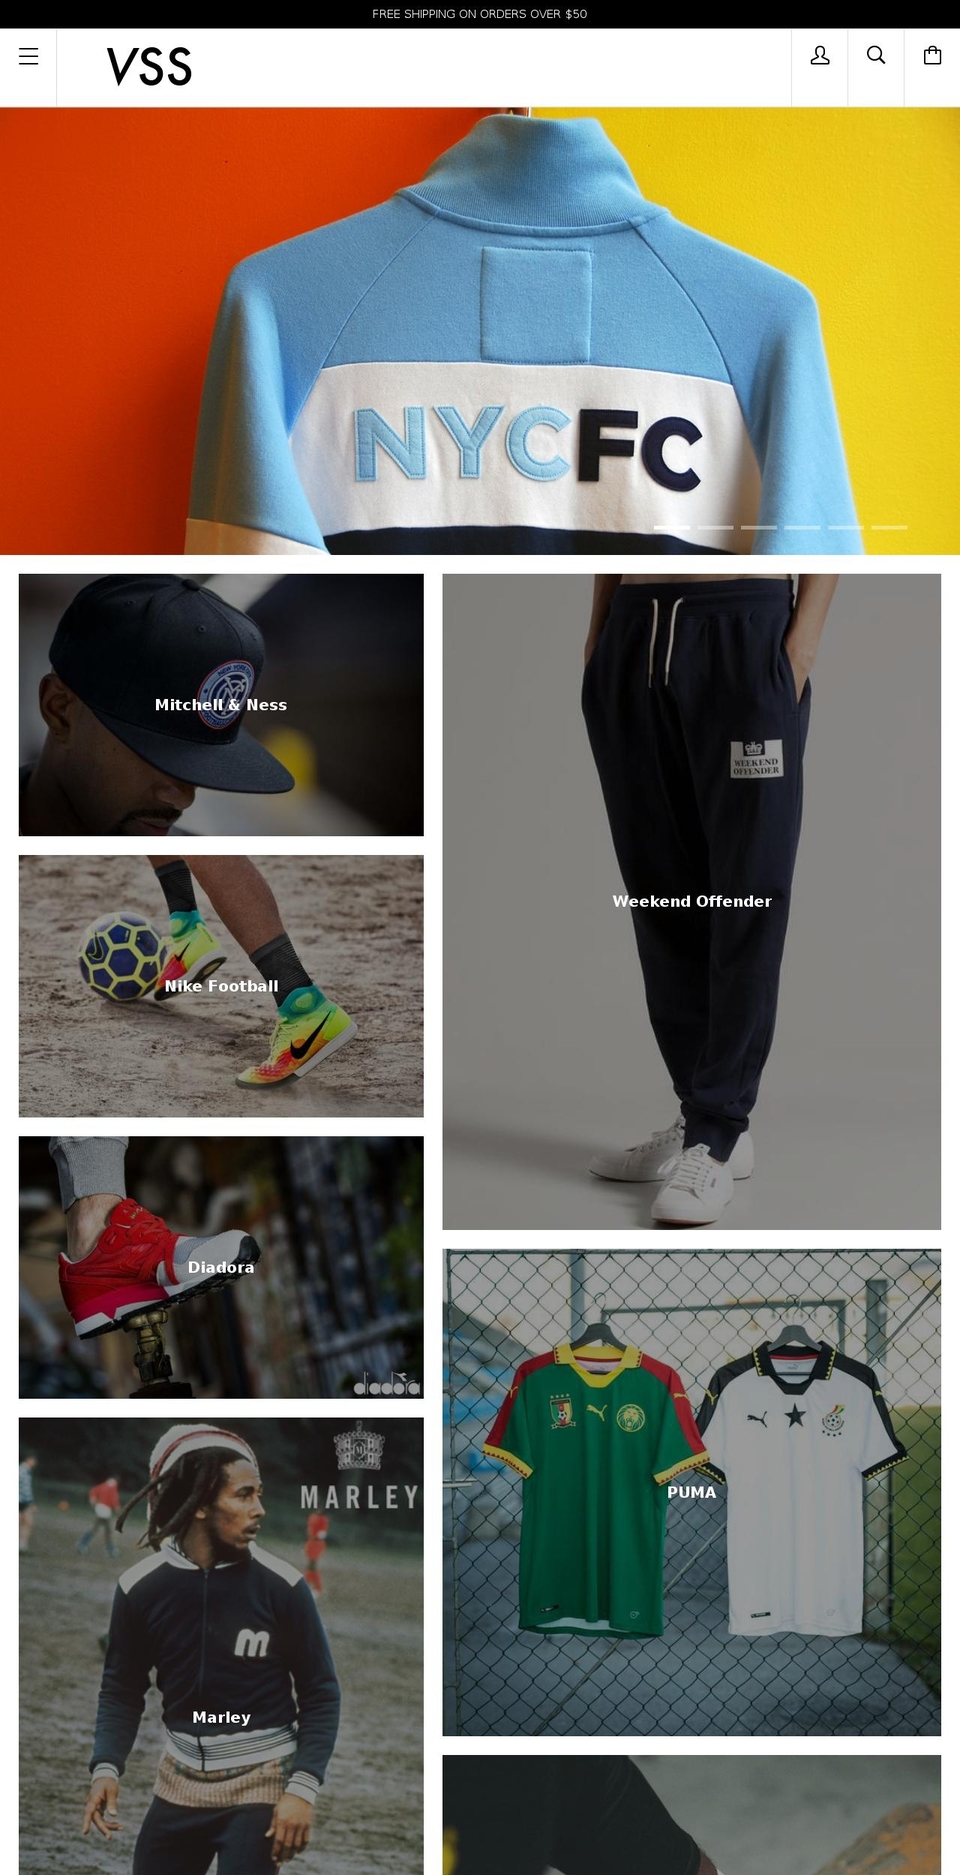 Taiga Shopify theme site example villagesoccershop.com